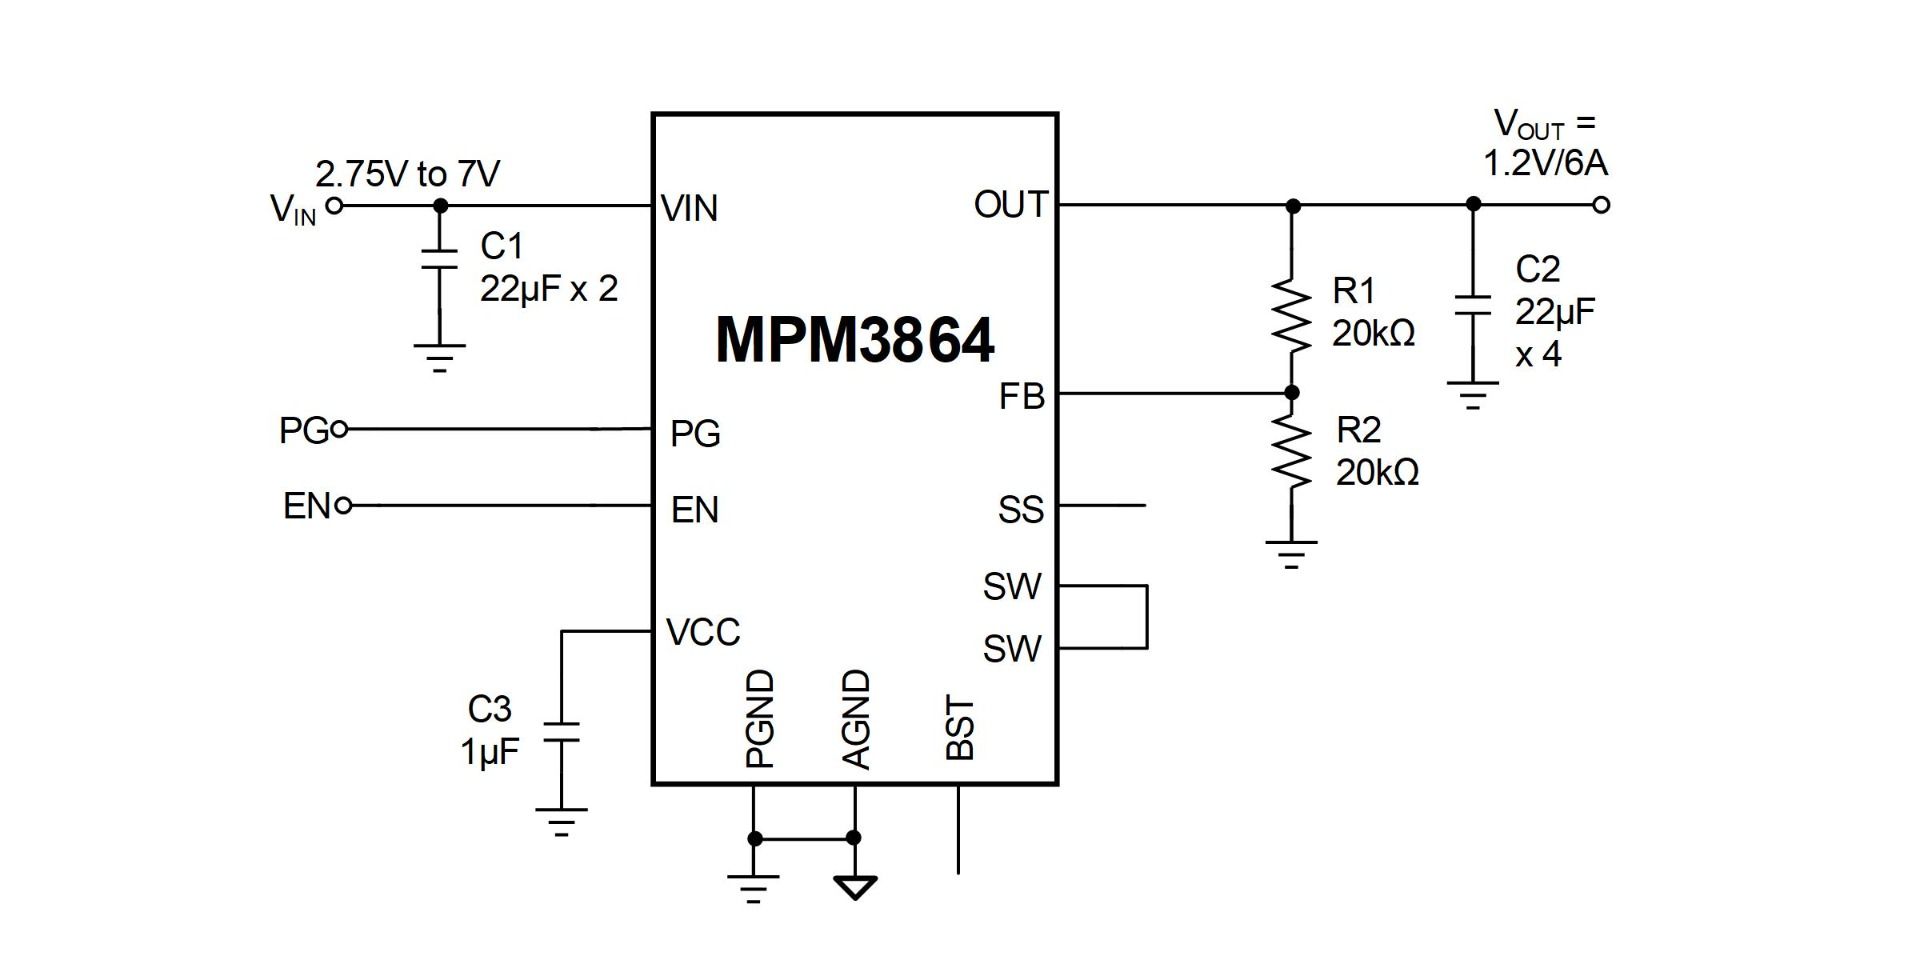 MPM3699 | Scalable, 16V, 4-Phase, Peak 160A Power Block Module | MPS